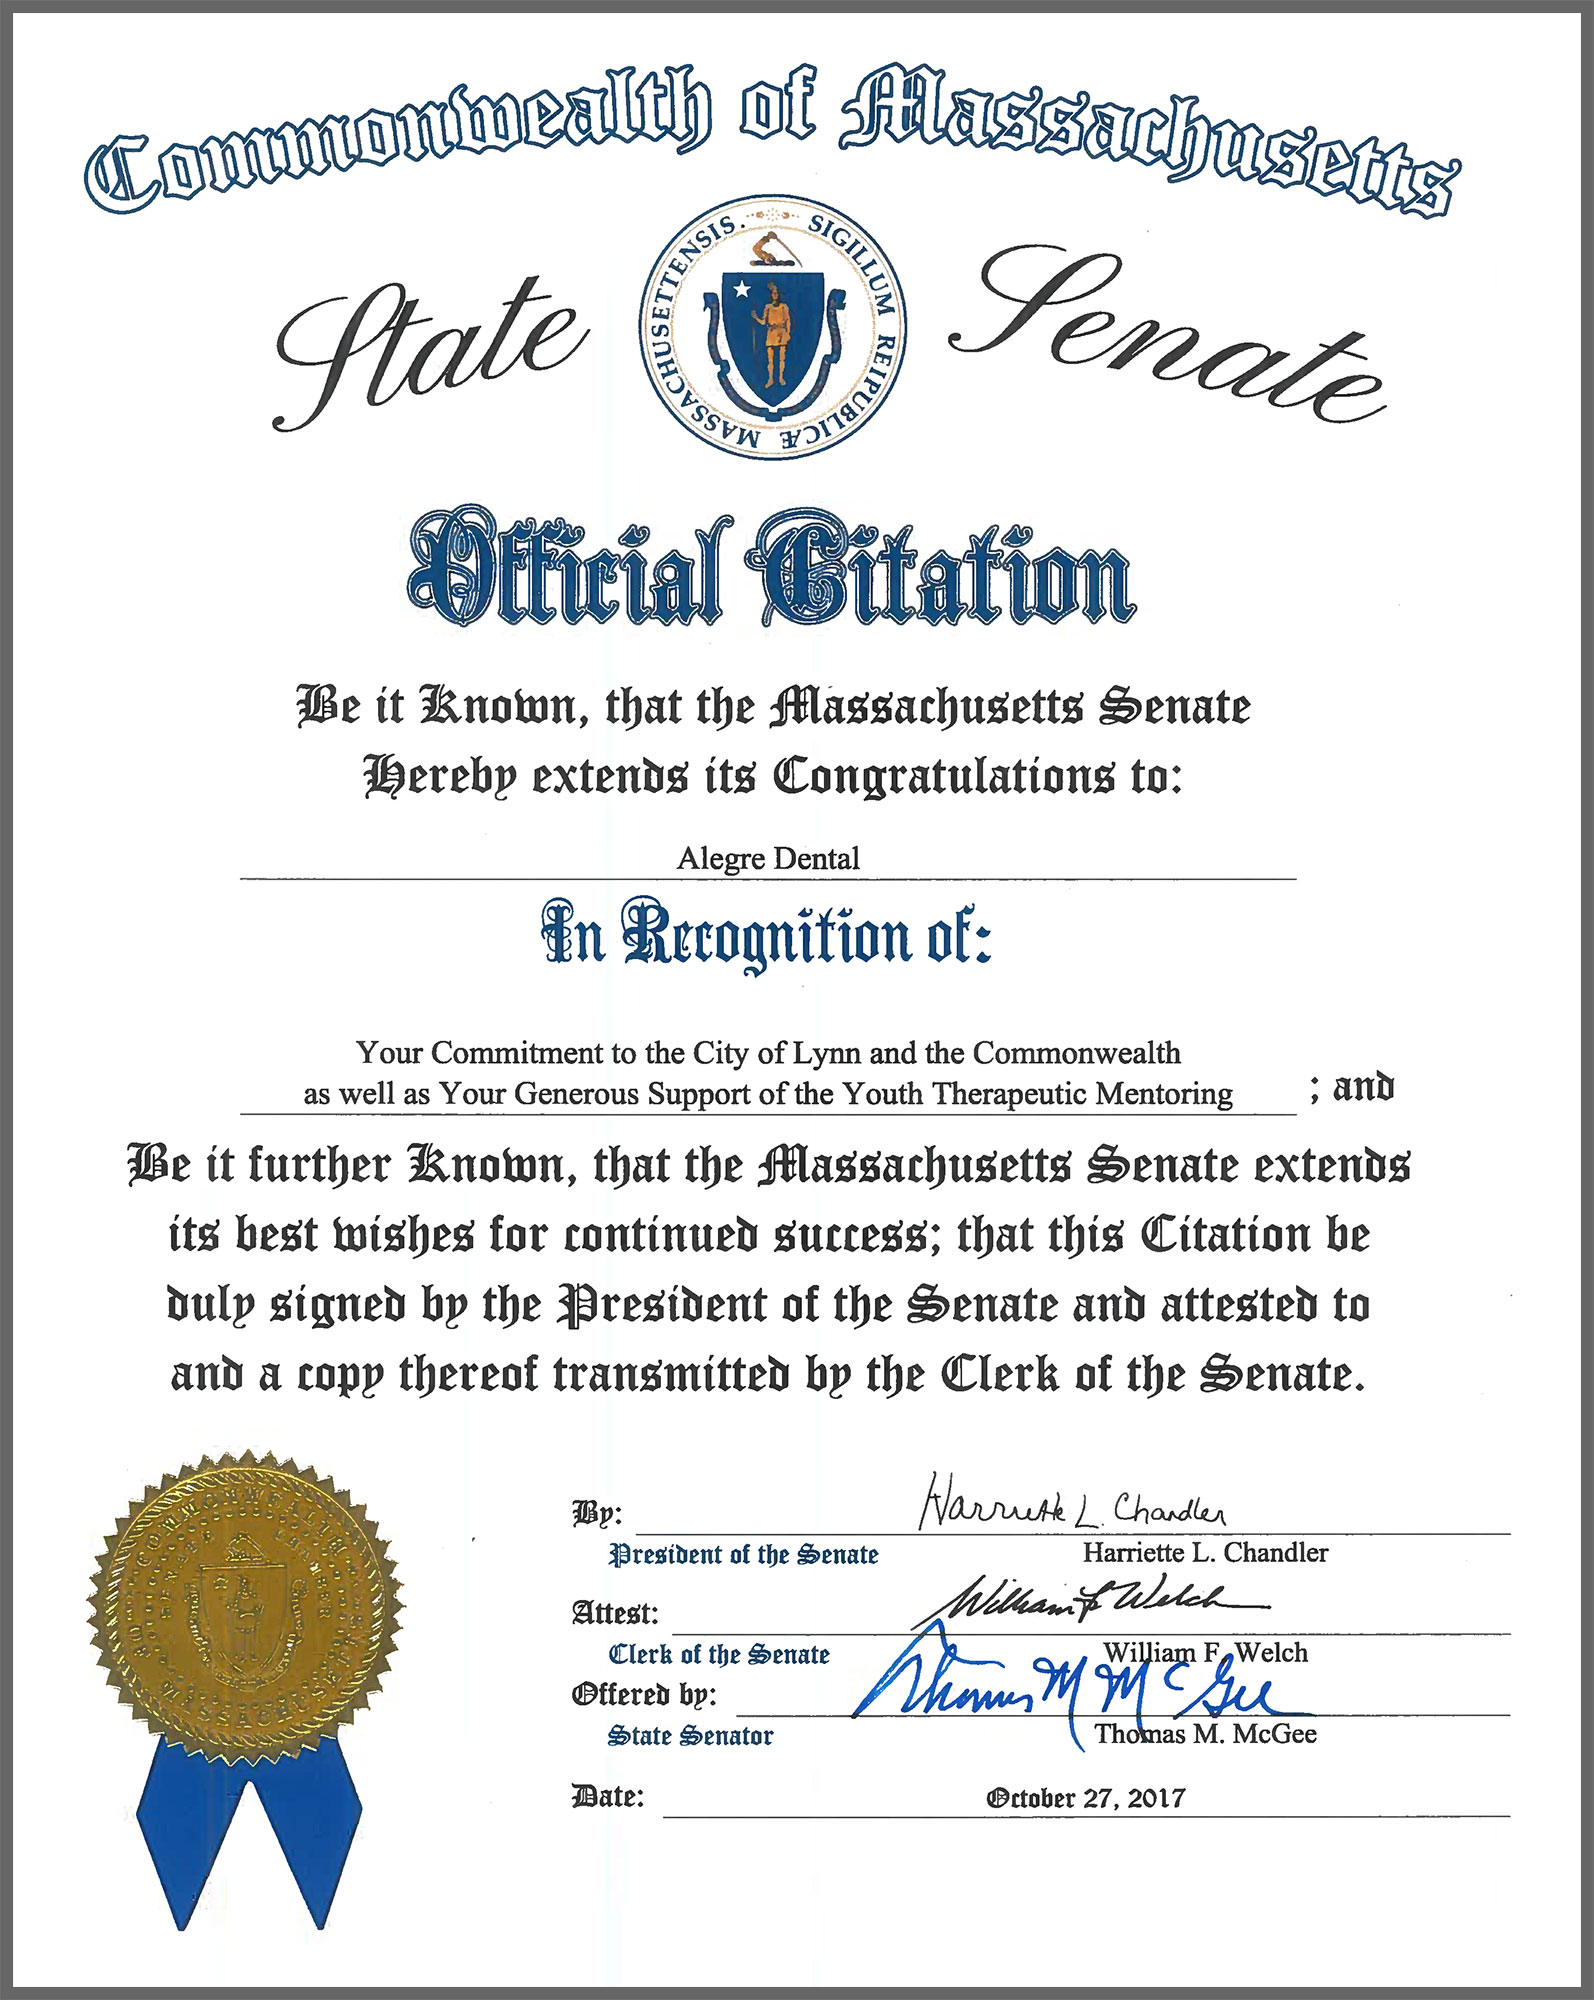 Massachusetts State Senate congratulates and extends the recognition of Alegre Dental Center for its contribution to the City of Lynn, MA, and its youth programs